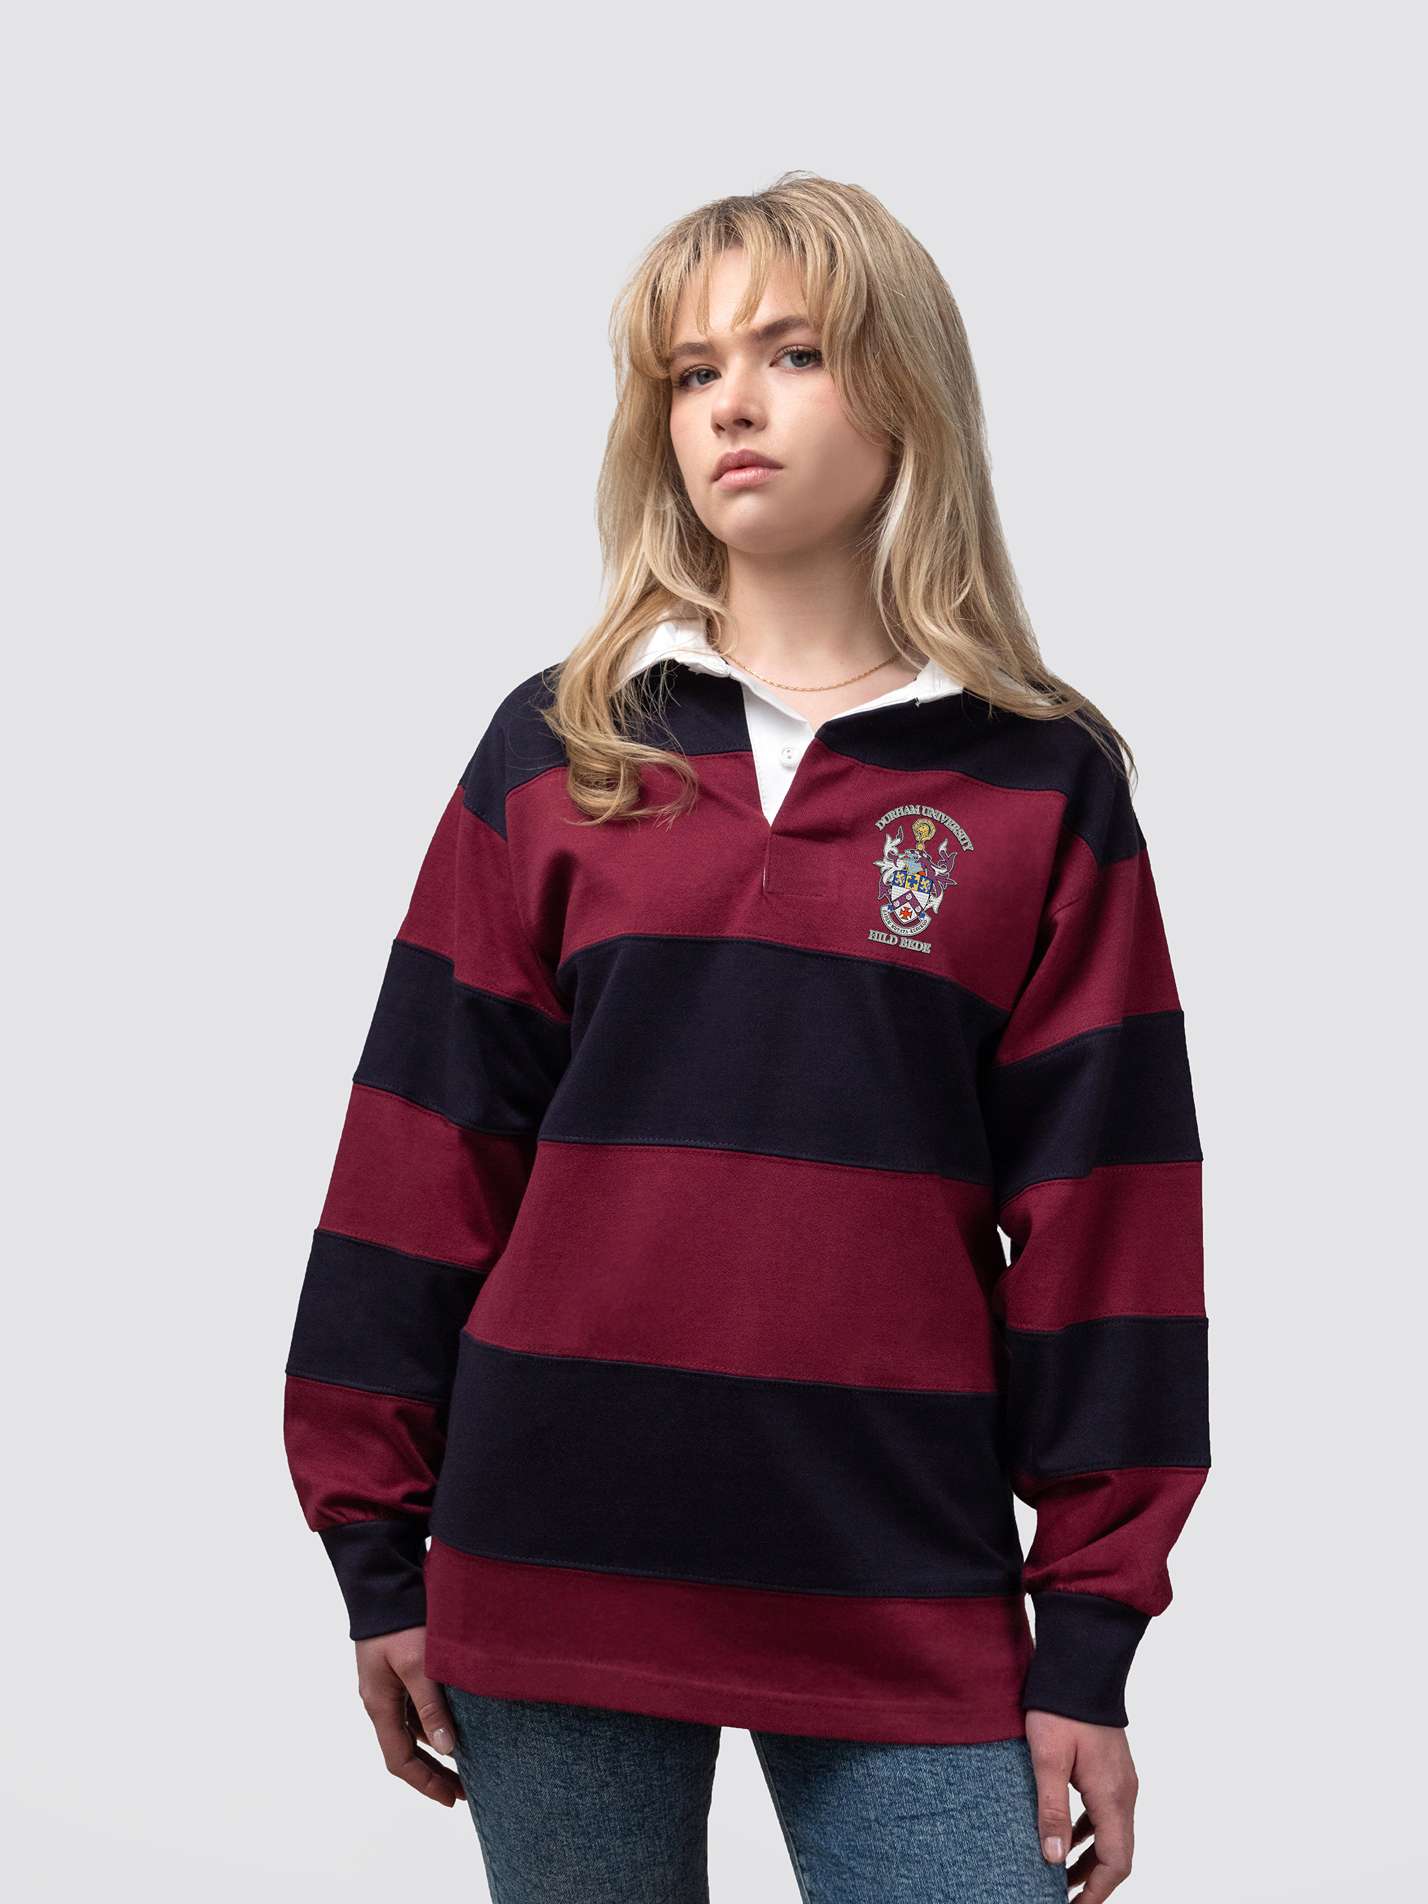 College of St Hild and St Bede rugby shirt, with burgundy and navy stripes